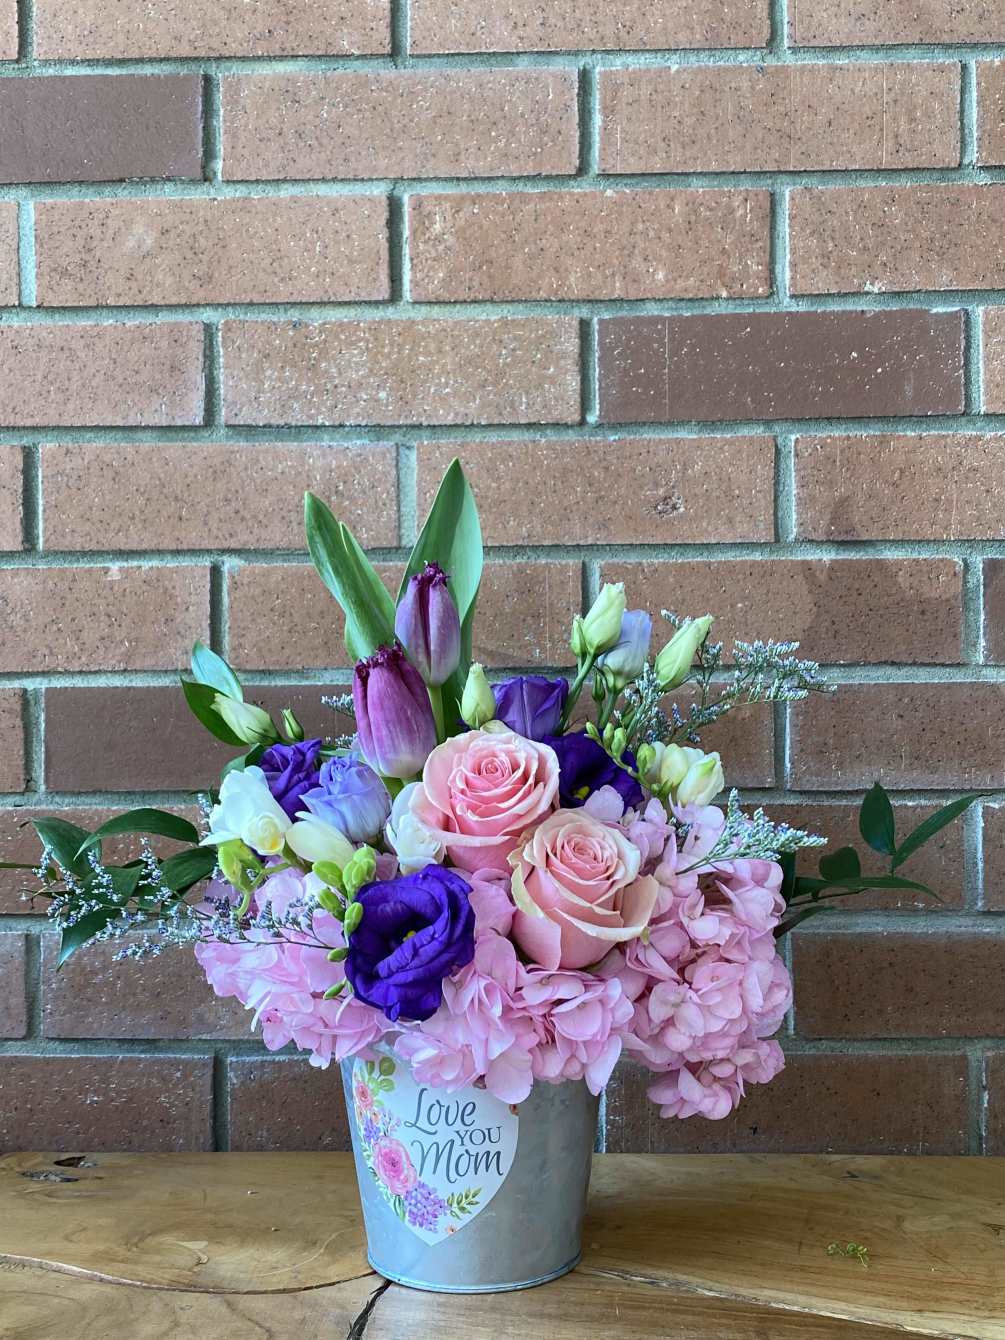 A charming planter full of fresh cut flowers! Sweet hydrangias, tullips and